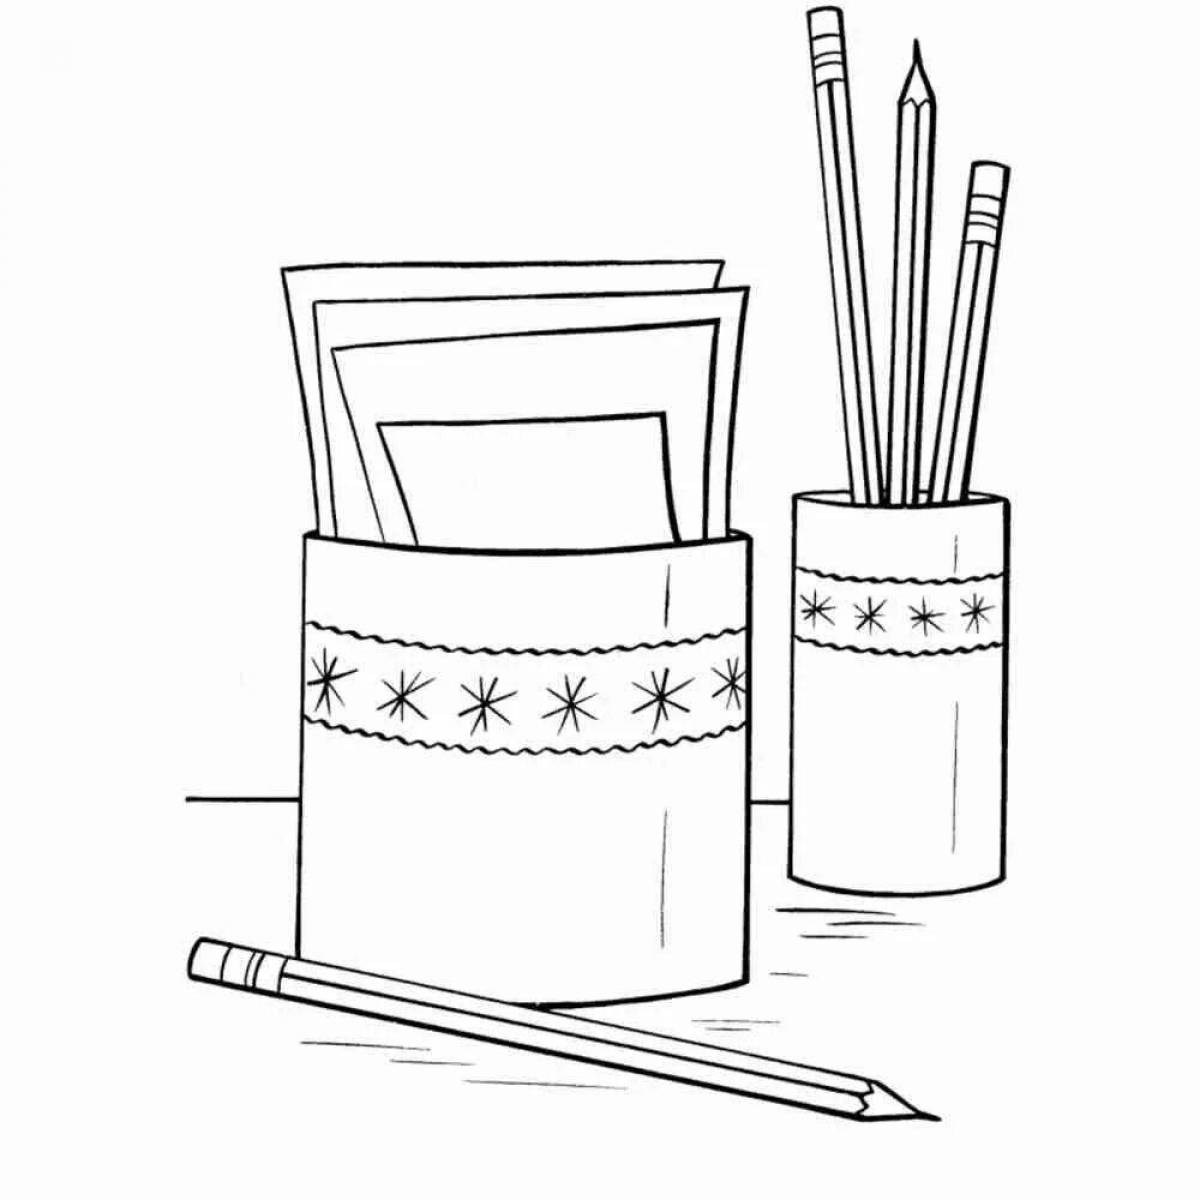 Colorful explosive coloring page with crayons